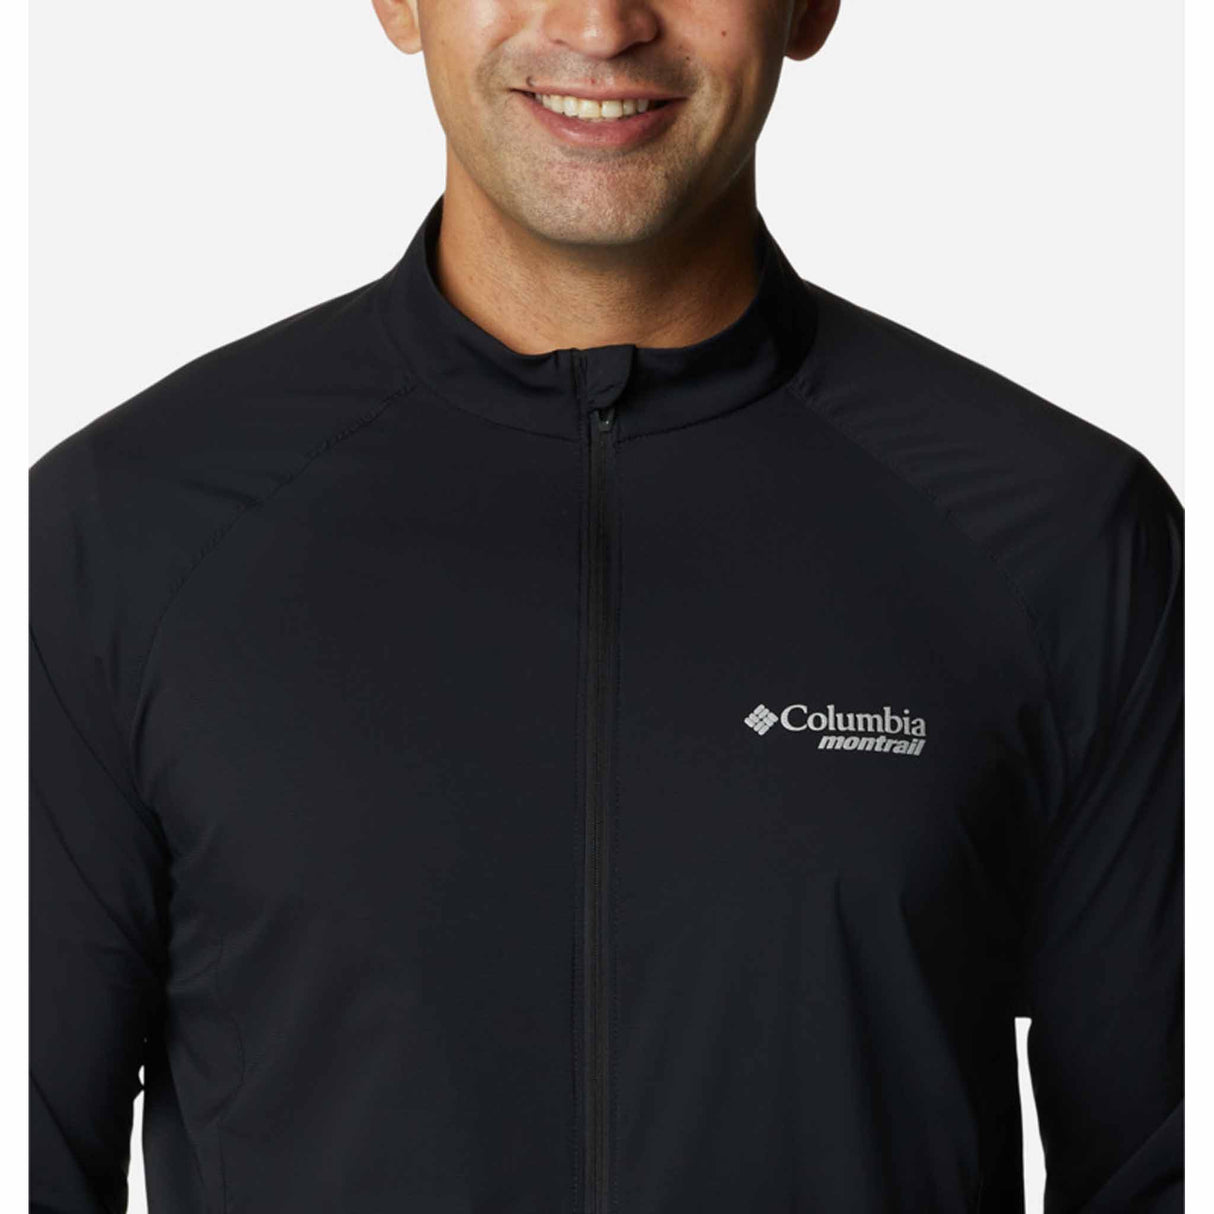 Columbia Endless Trail Wind Shell manteau coquille coupe-vent pour homme - Noir